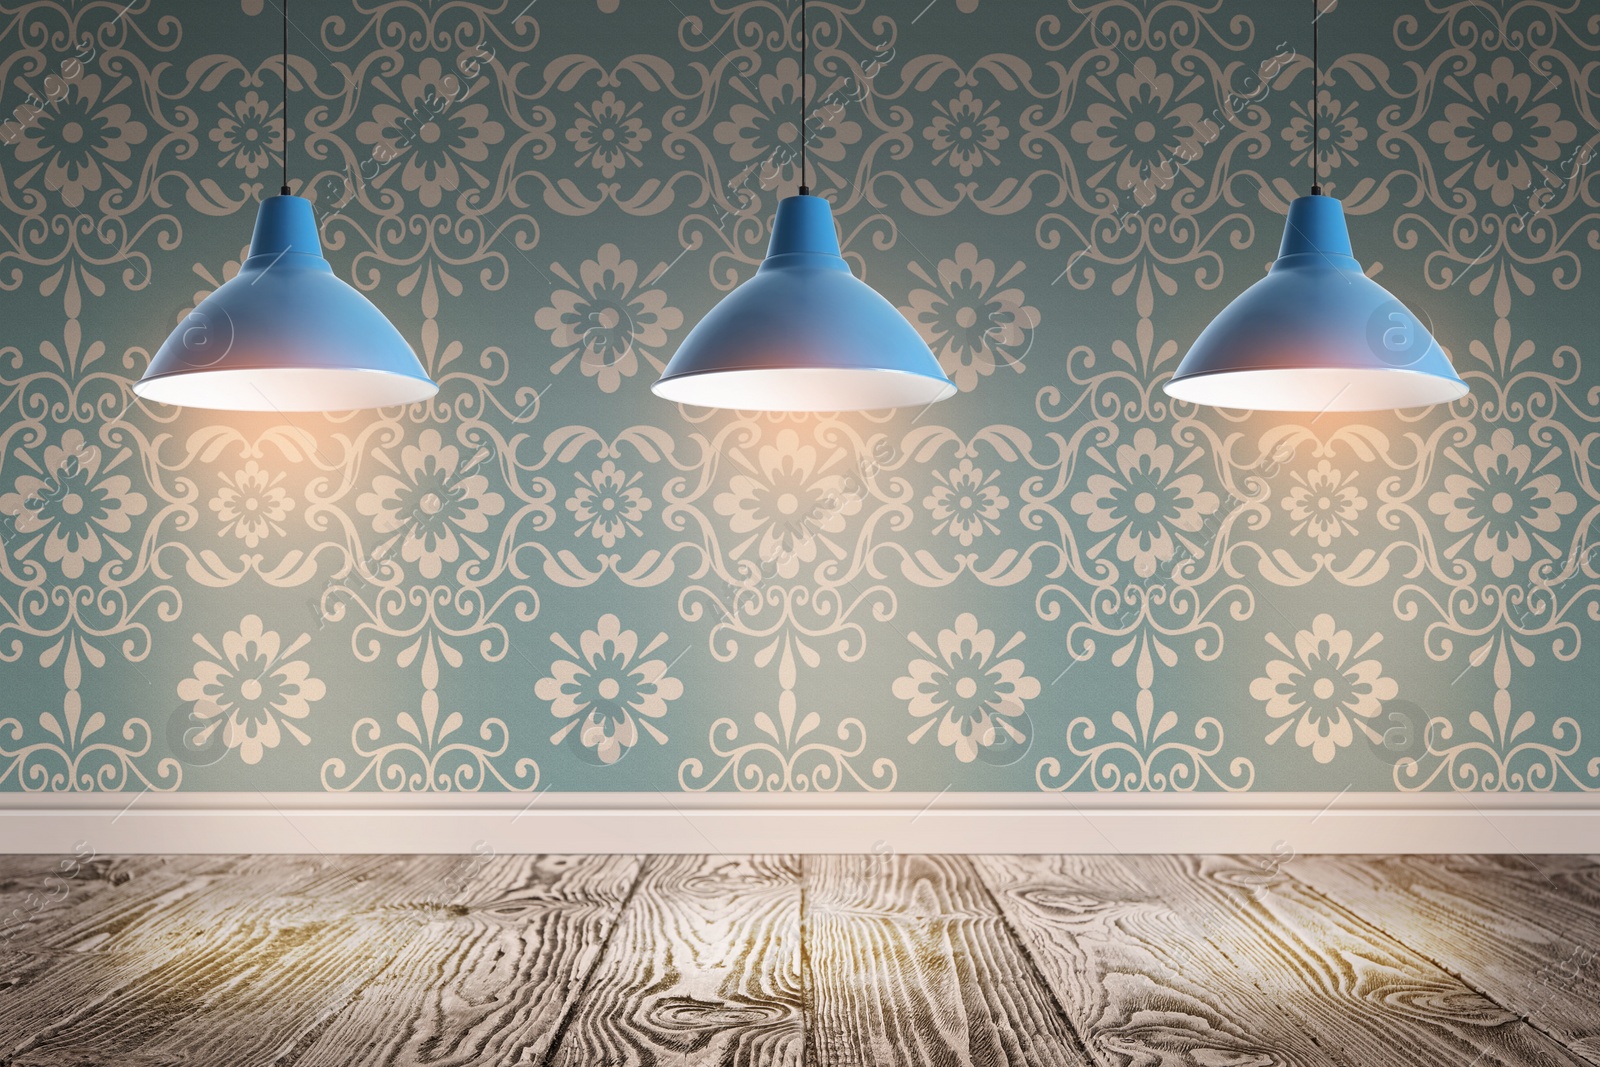 Image of Blue patterned wallpaper and glowing hanging lamps in room